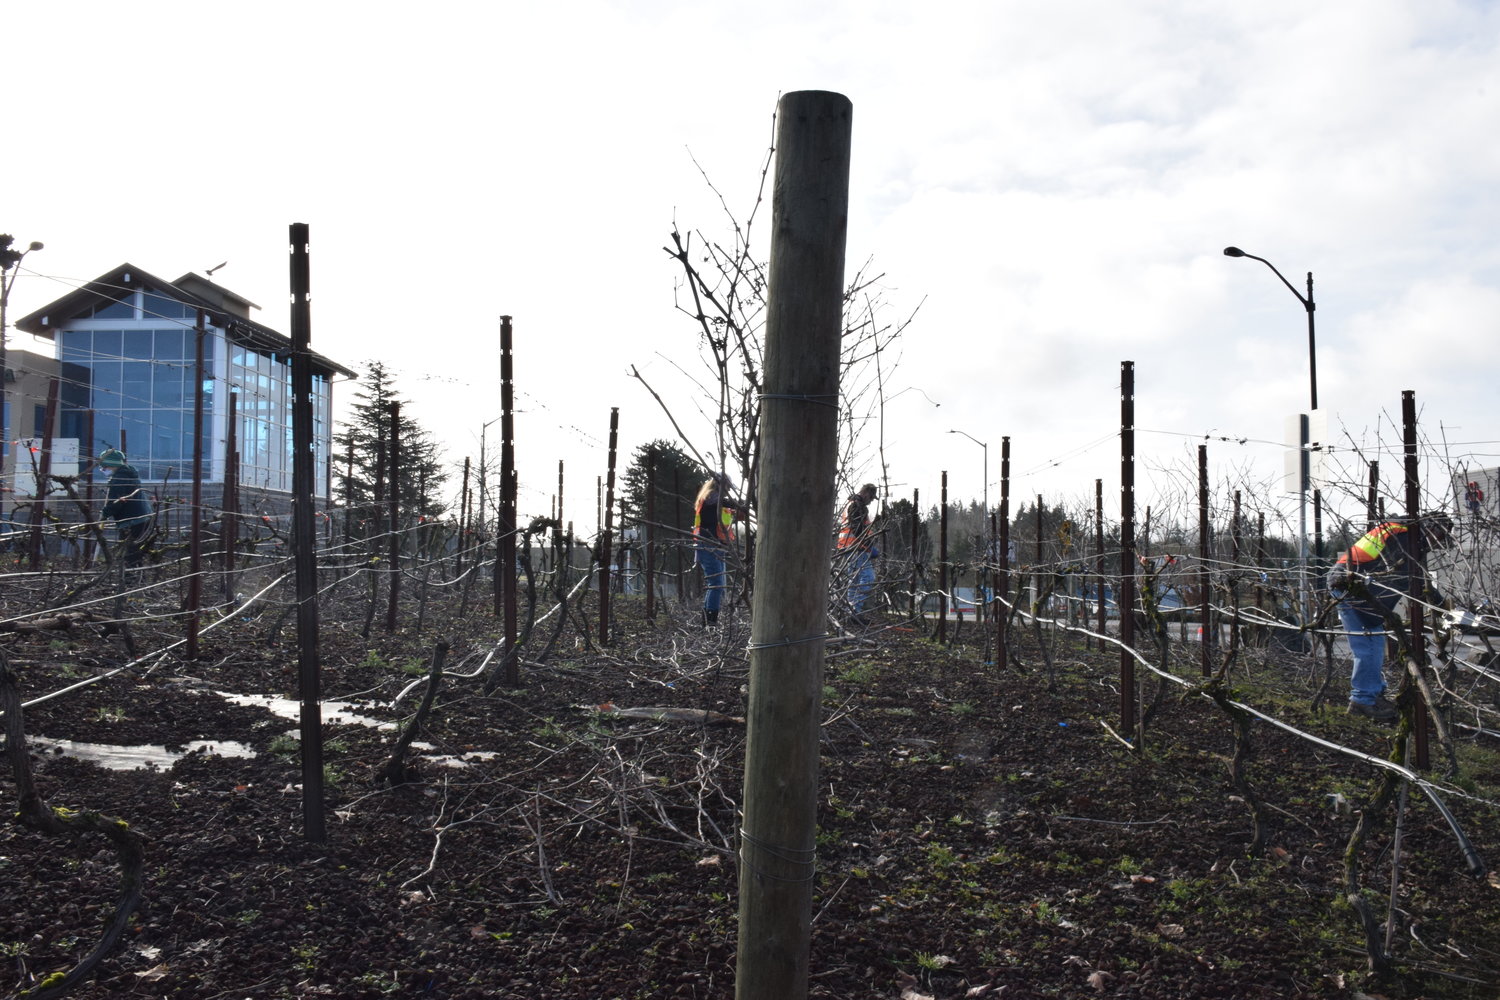 Volunteers work to prune grape vines at the 56th Place and Pioneer Street roundabout on Feb. 5.